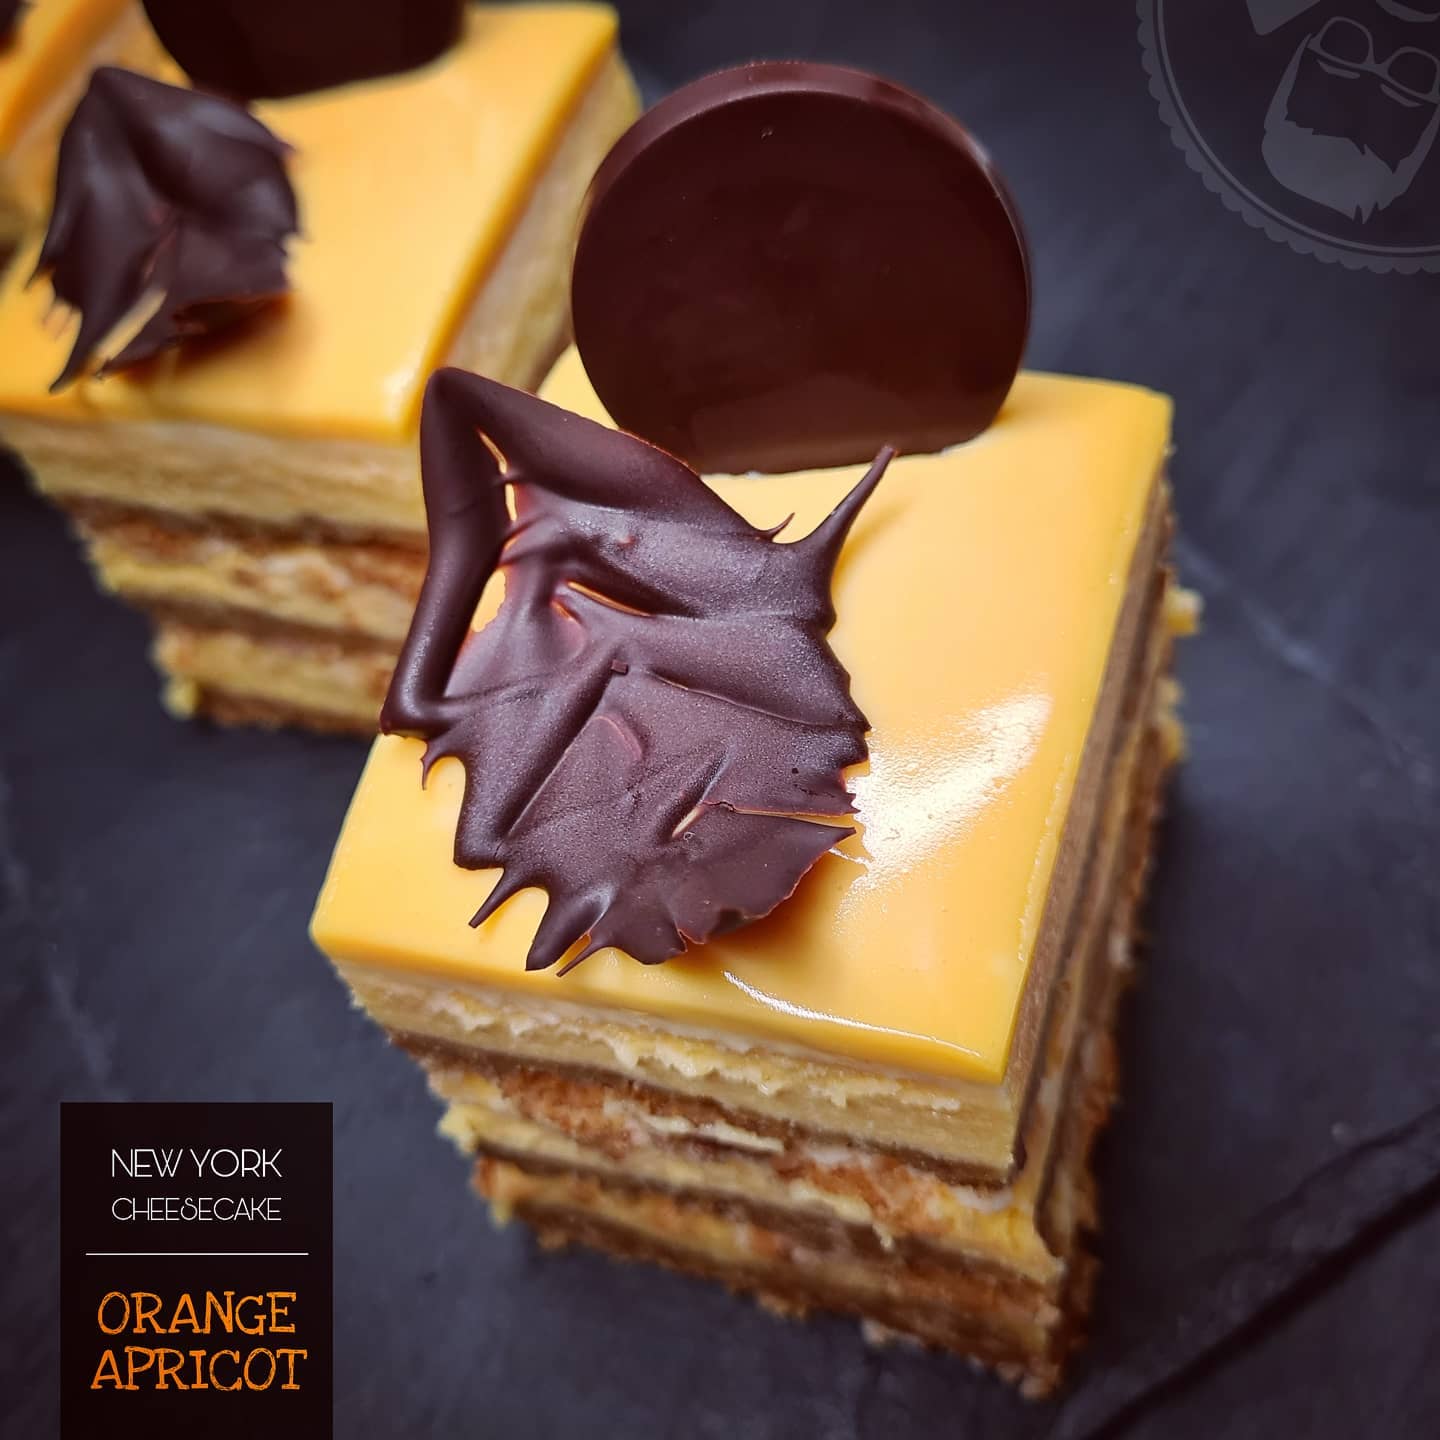 schmidt_cheesecake_muenchen_home_nycheesecake_patisserie_icon